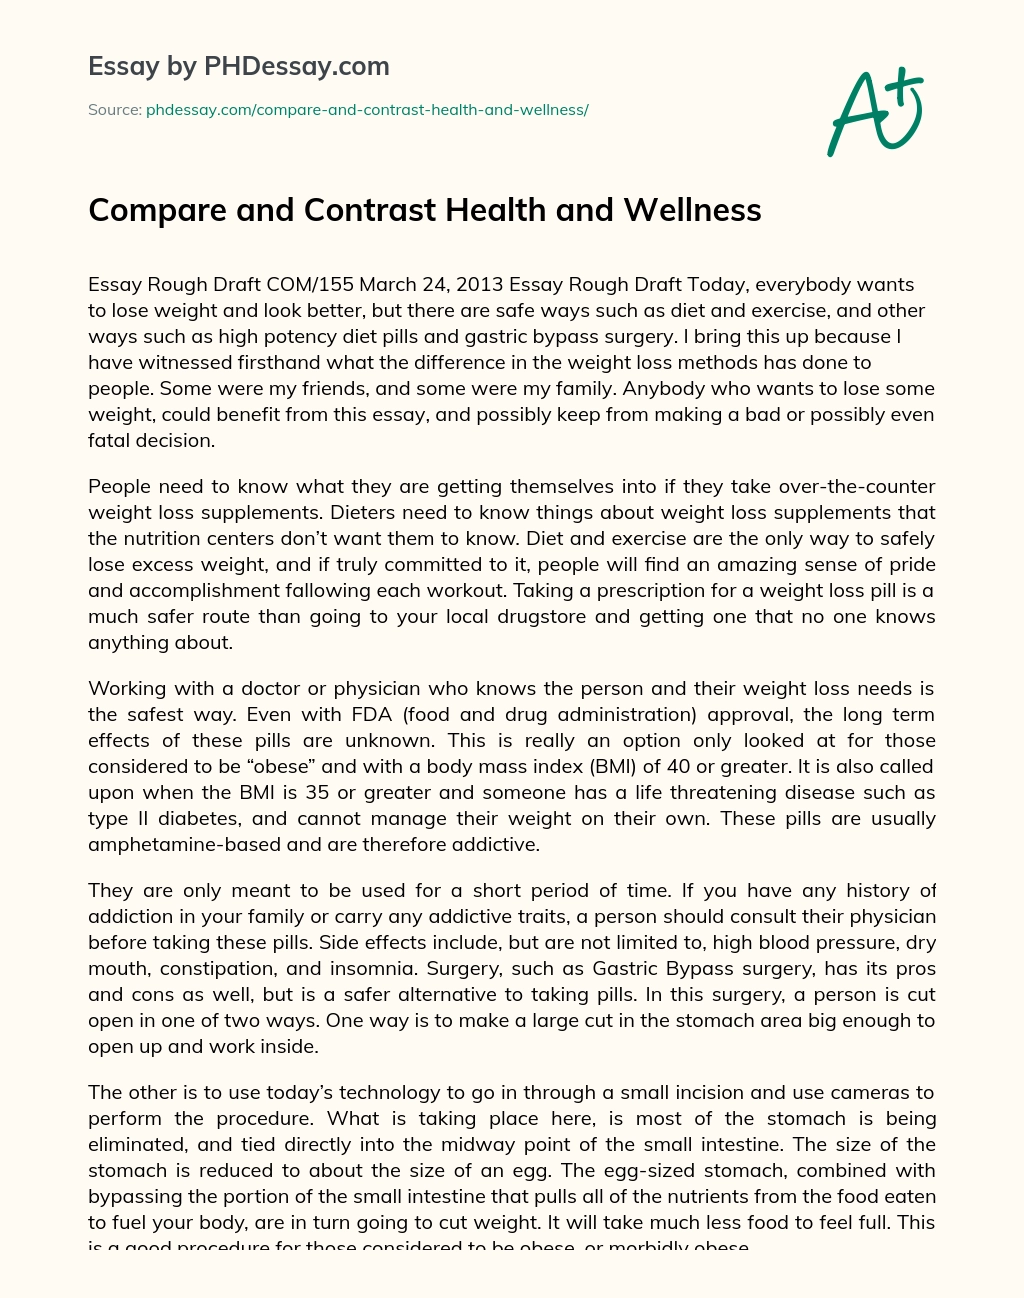 Compare and Contrast Health and Wellness essay